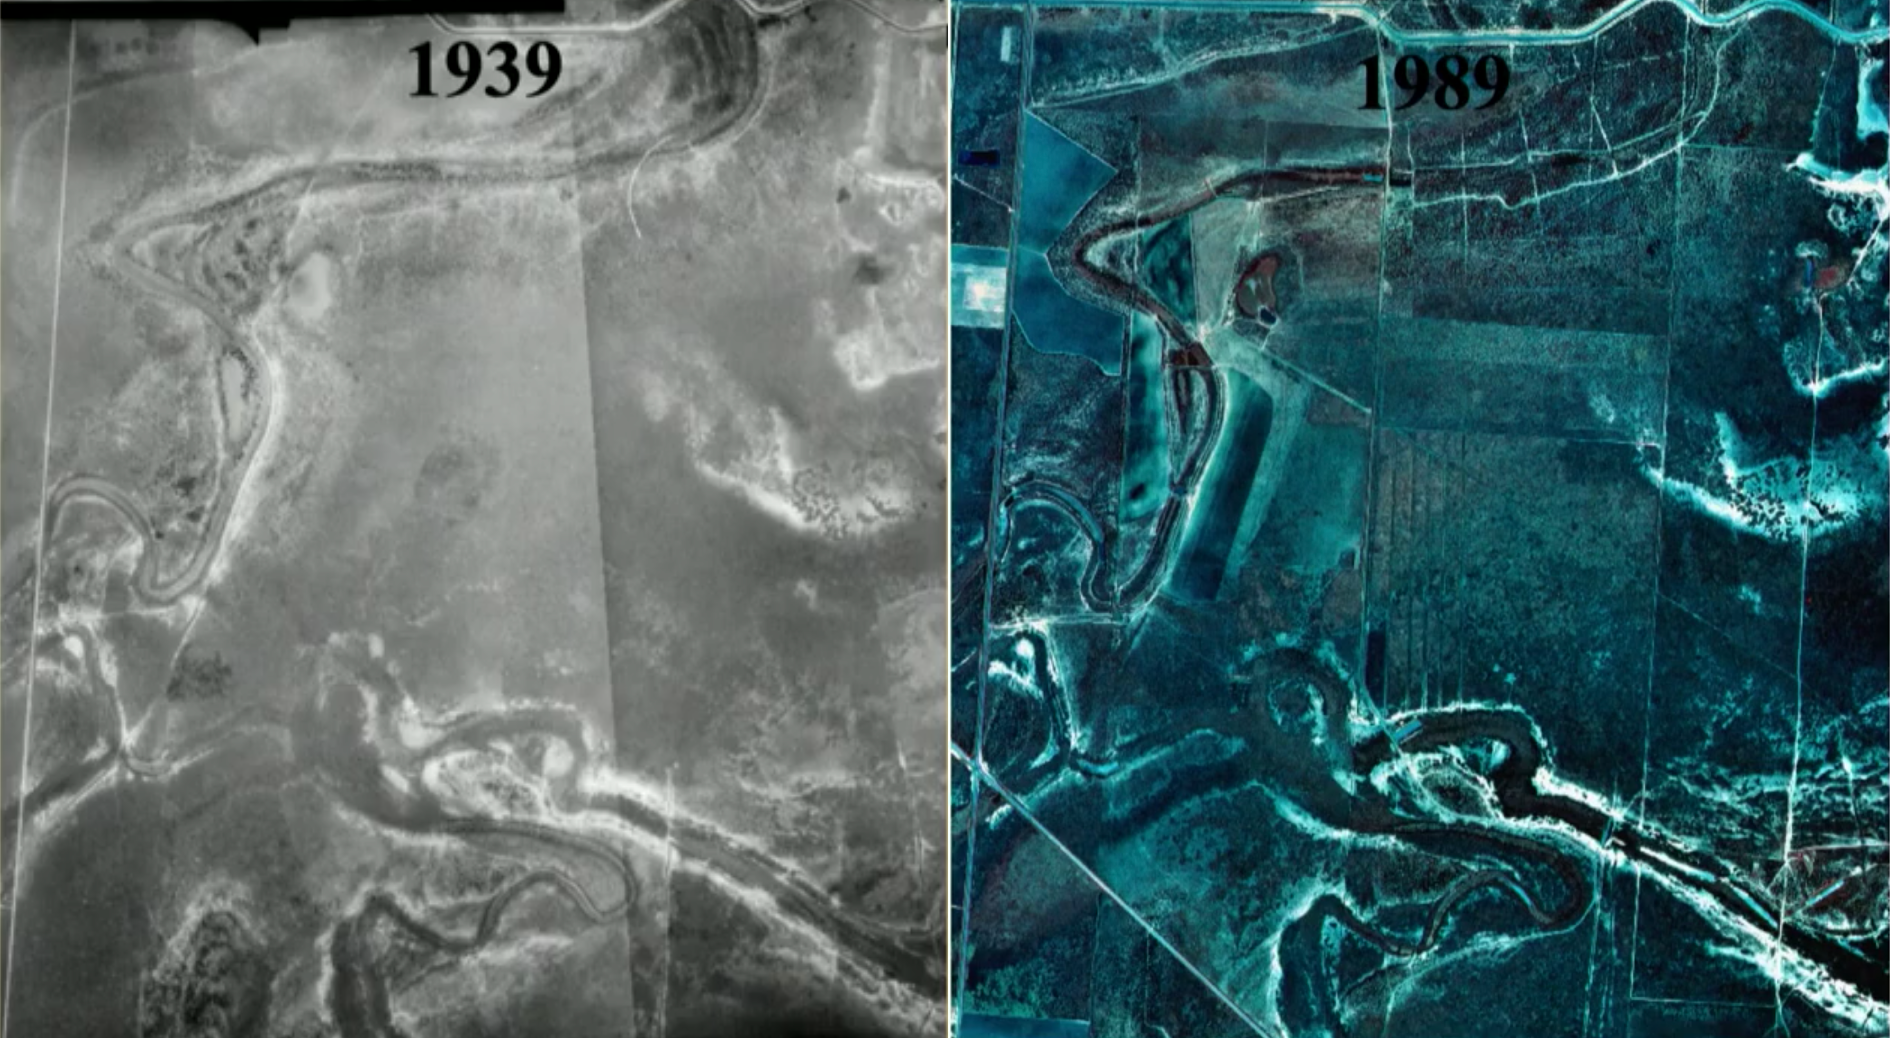 Aerial photos of the battlefield showing nearby changes between 1939 and 1989.